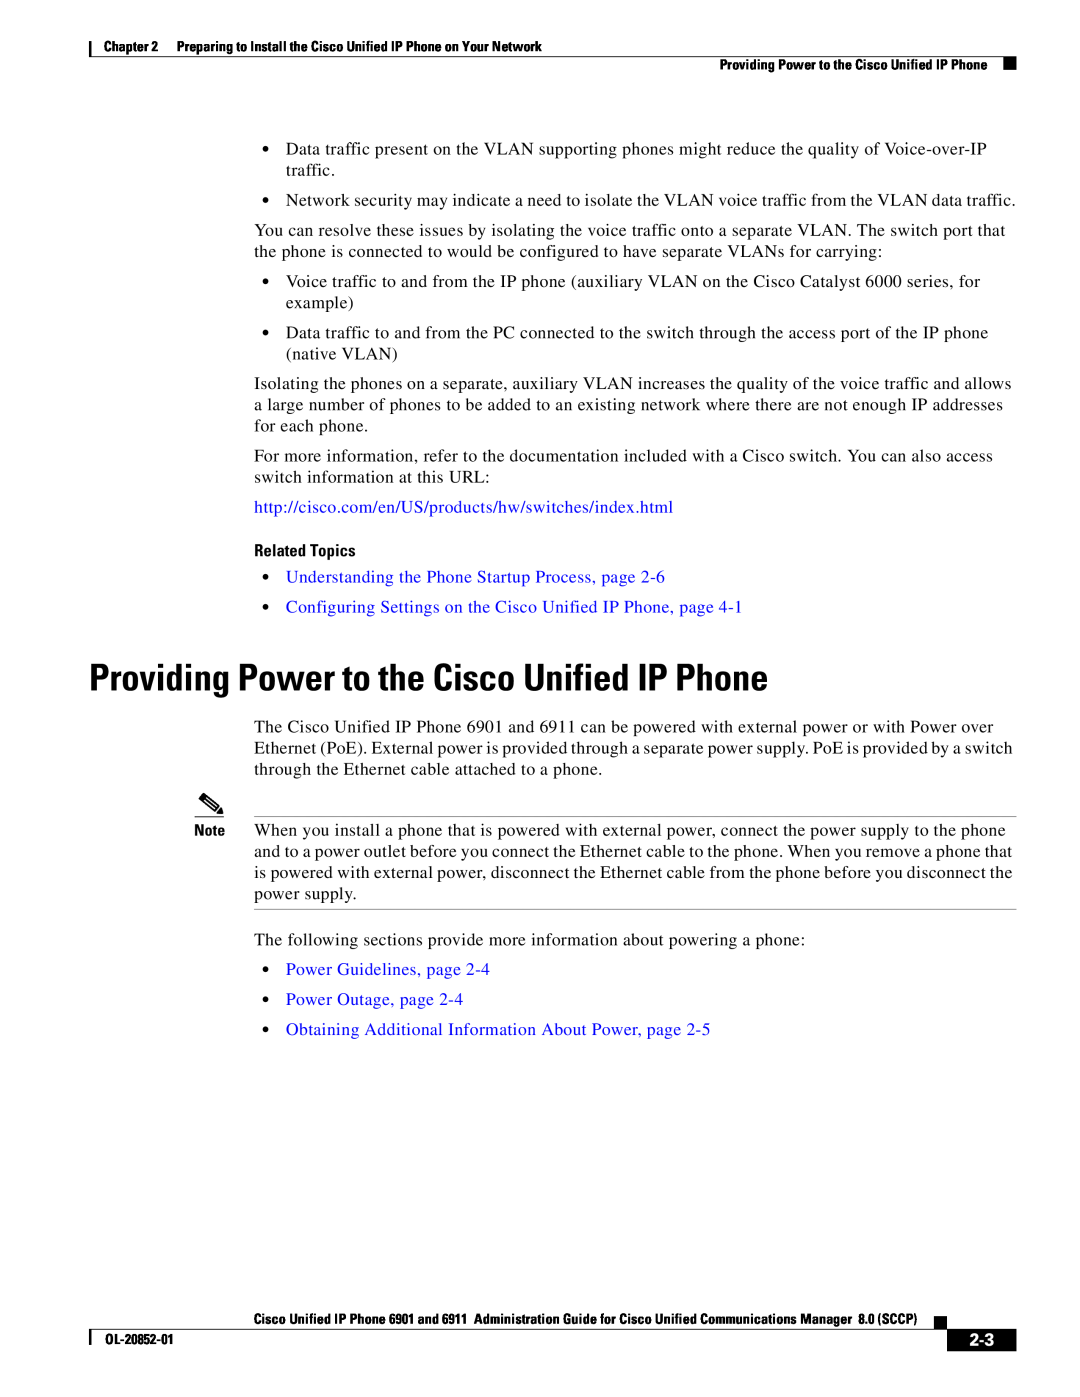 Cisco Systems 691 Providing Power to the Cisco Unified IP Phone, http//cisco.com/en/US/products/hw/switches/index.html 